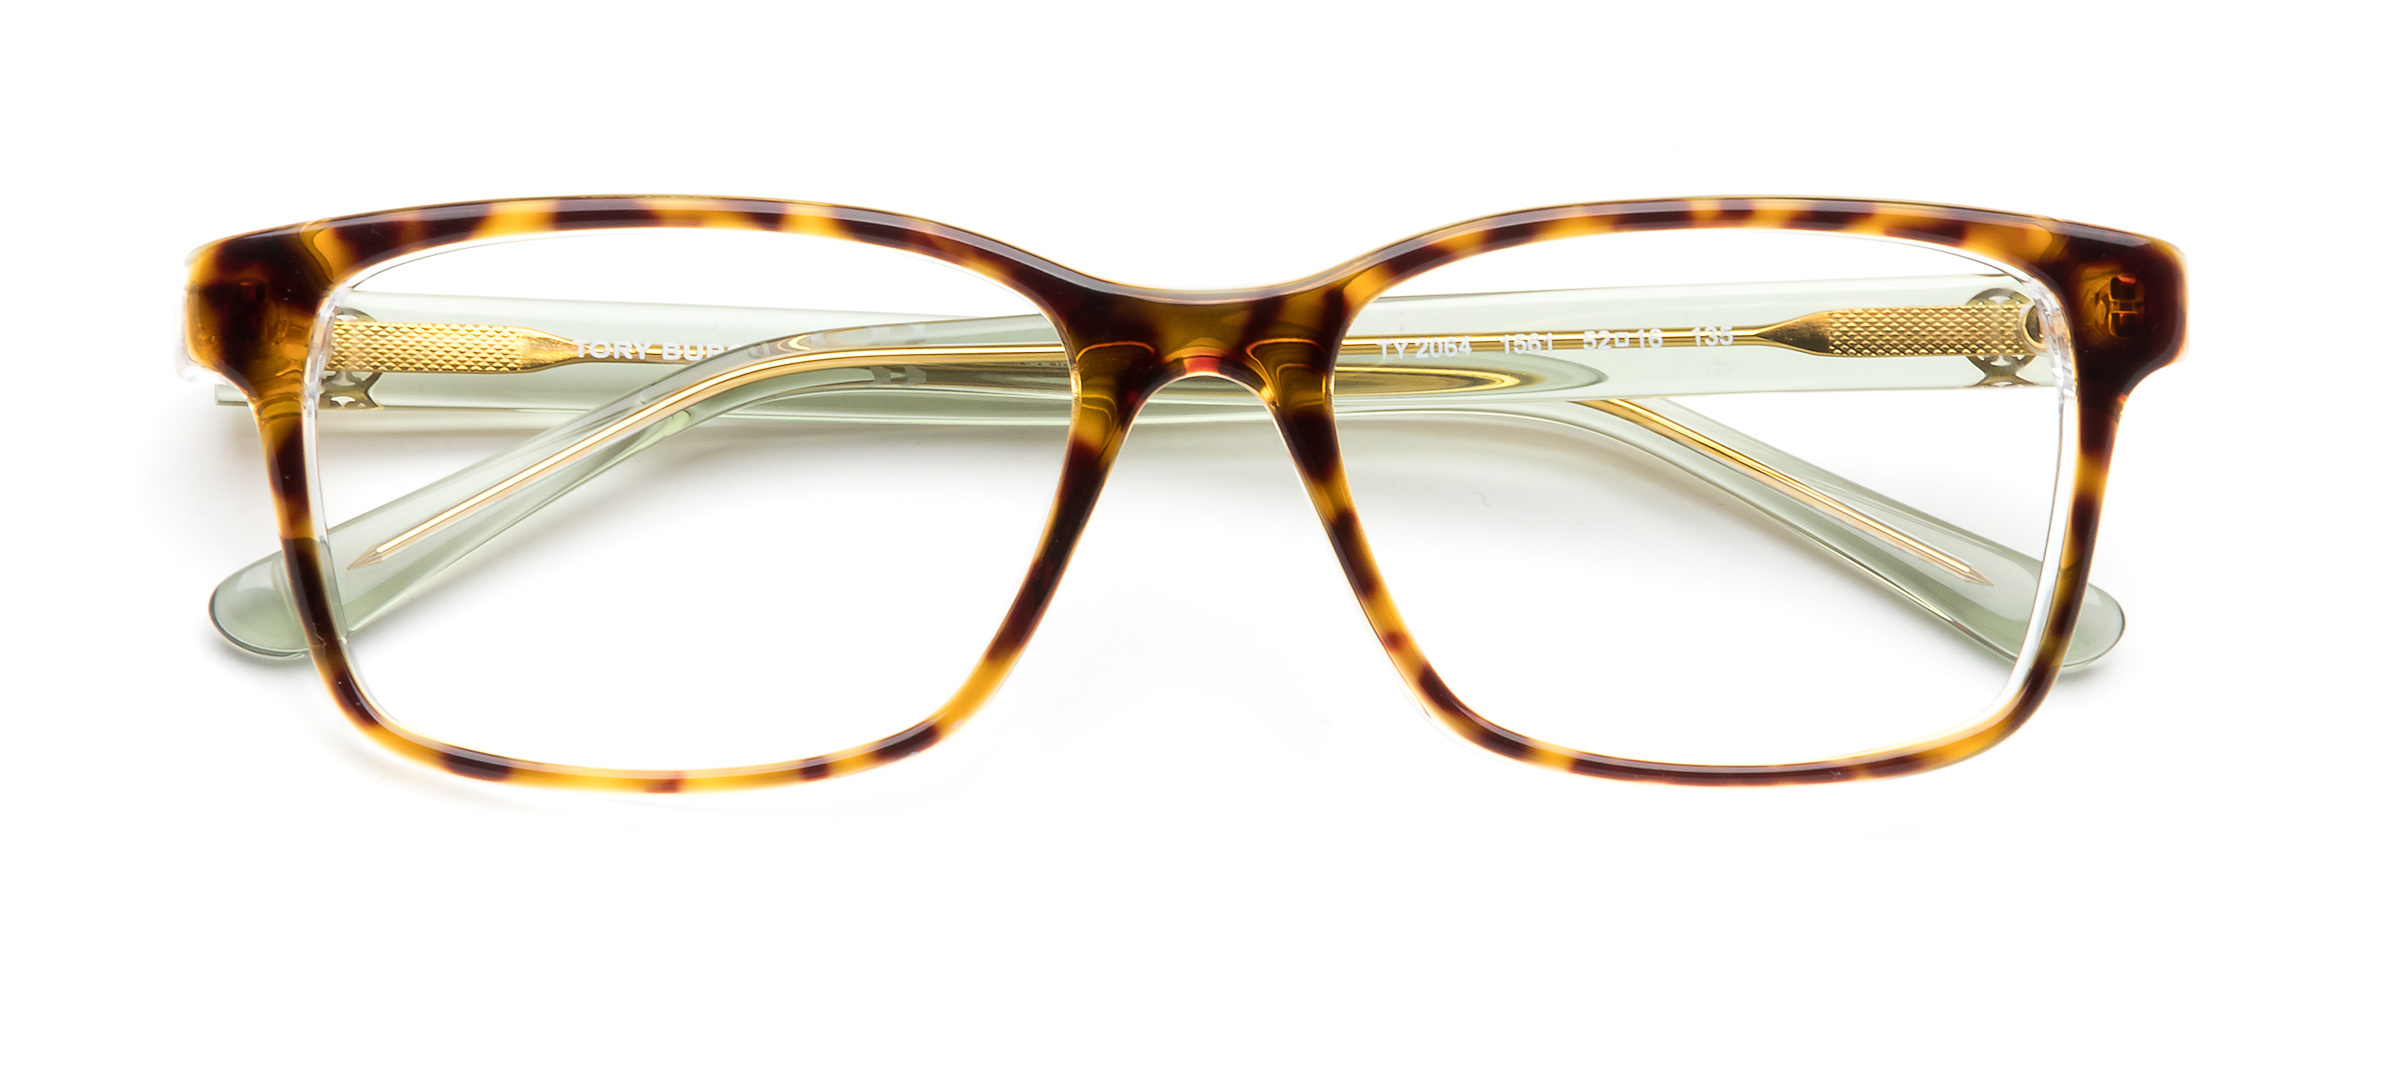 Tory Burch Glasses for Men & Women | Clearly